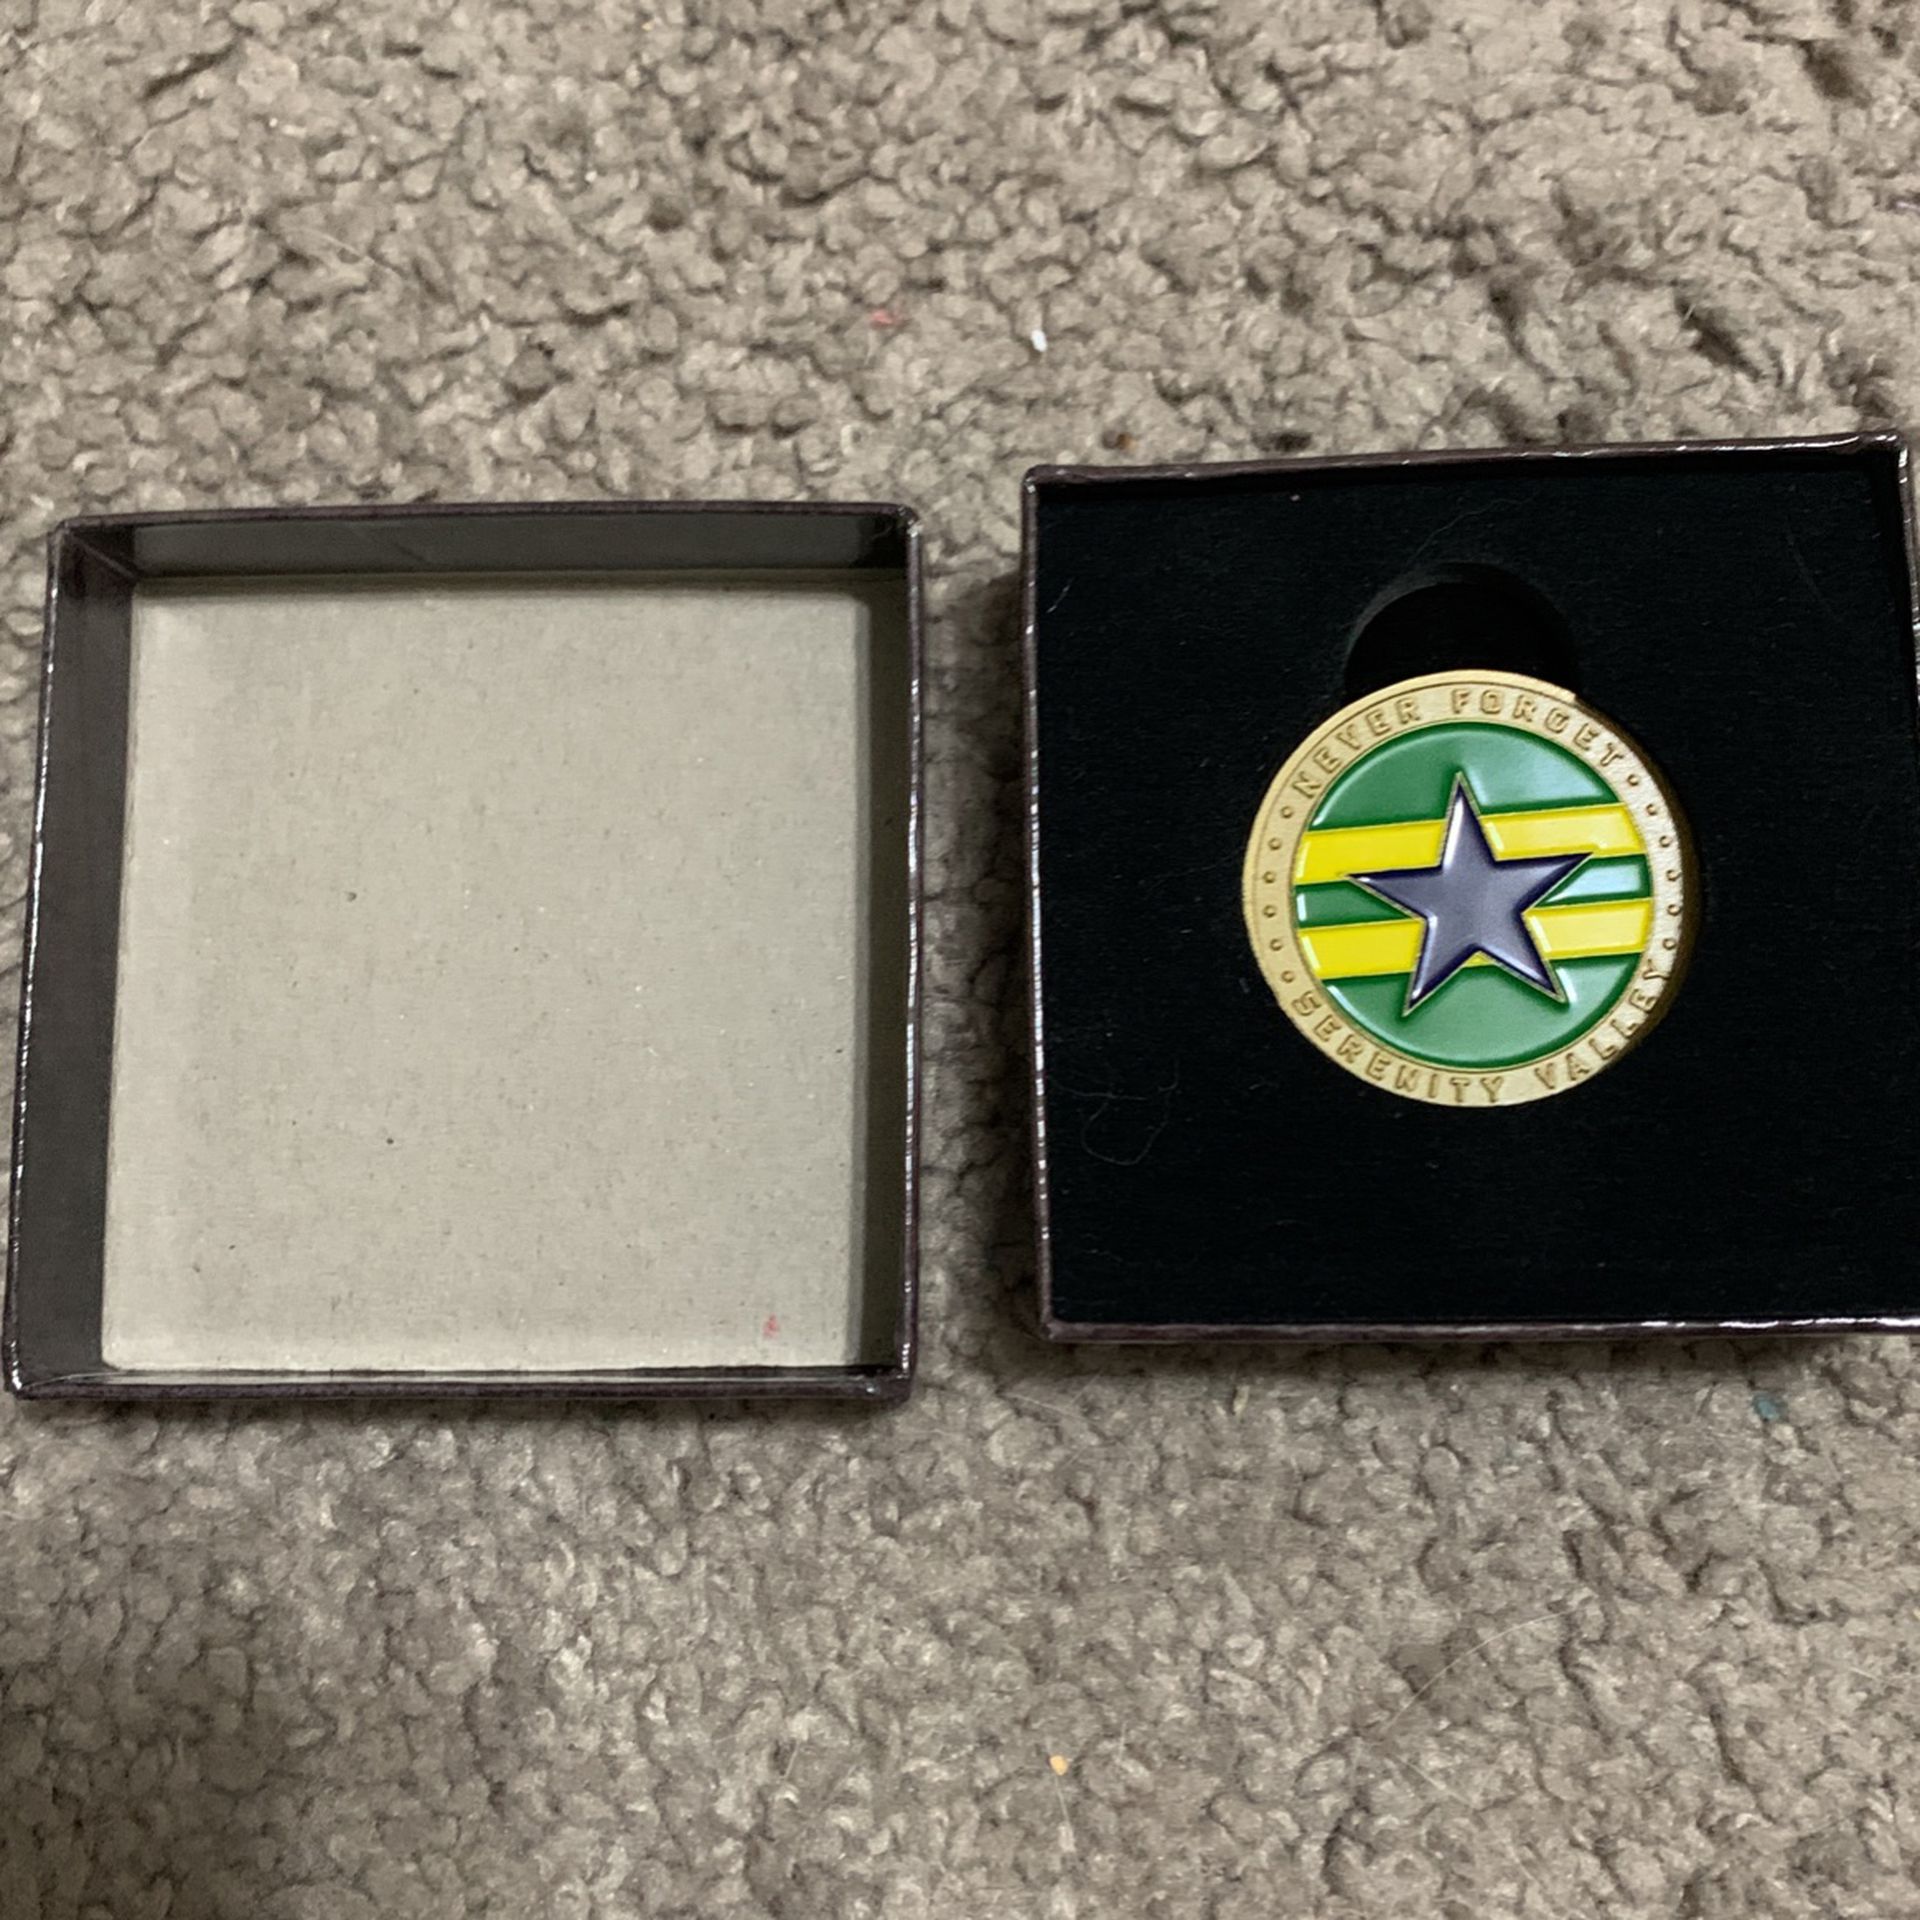 Firefly Limited Edition Challenge Coin!